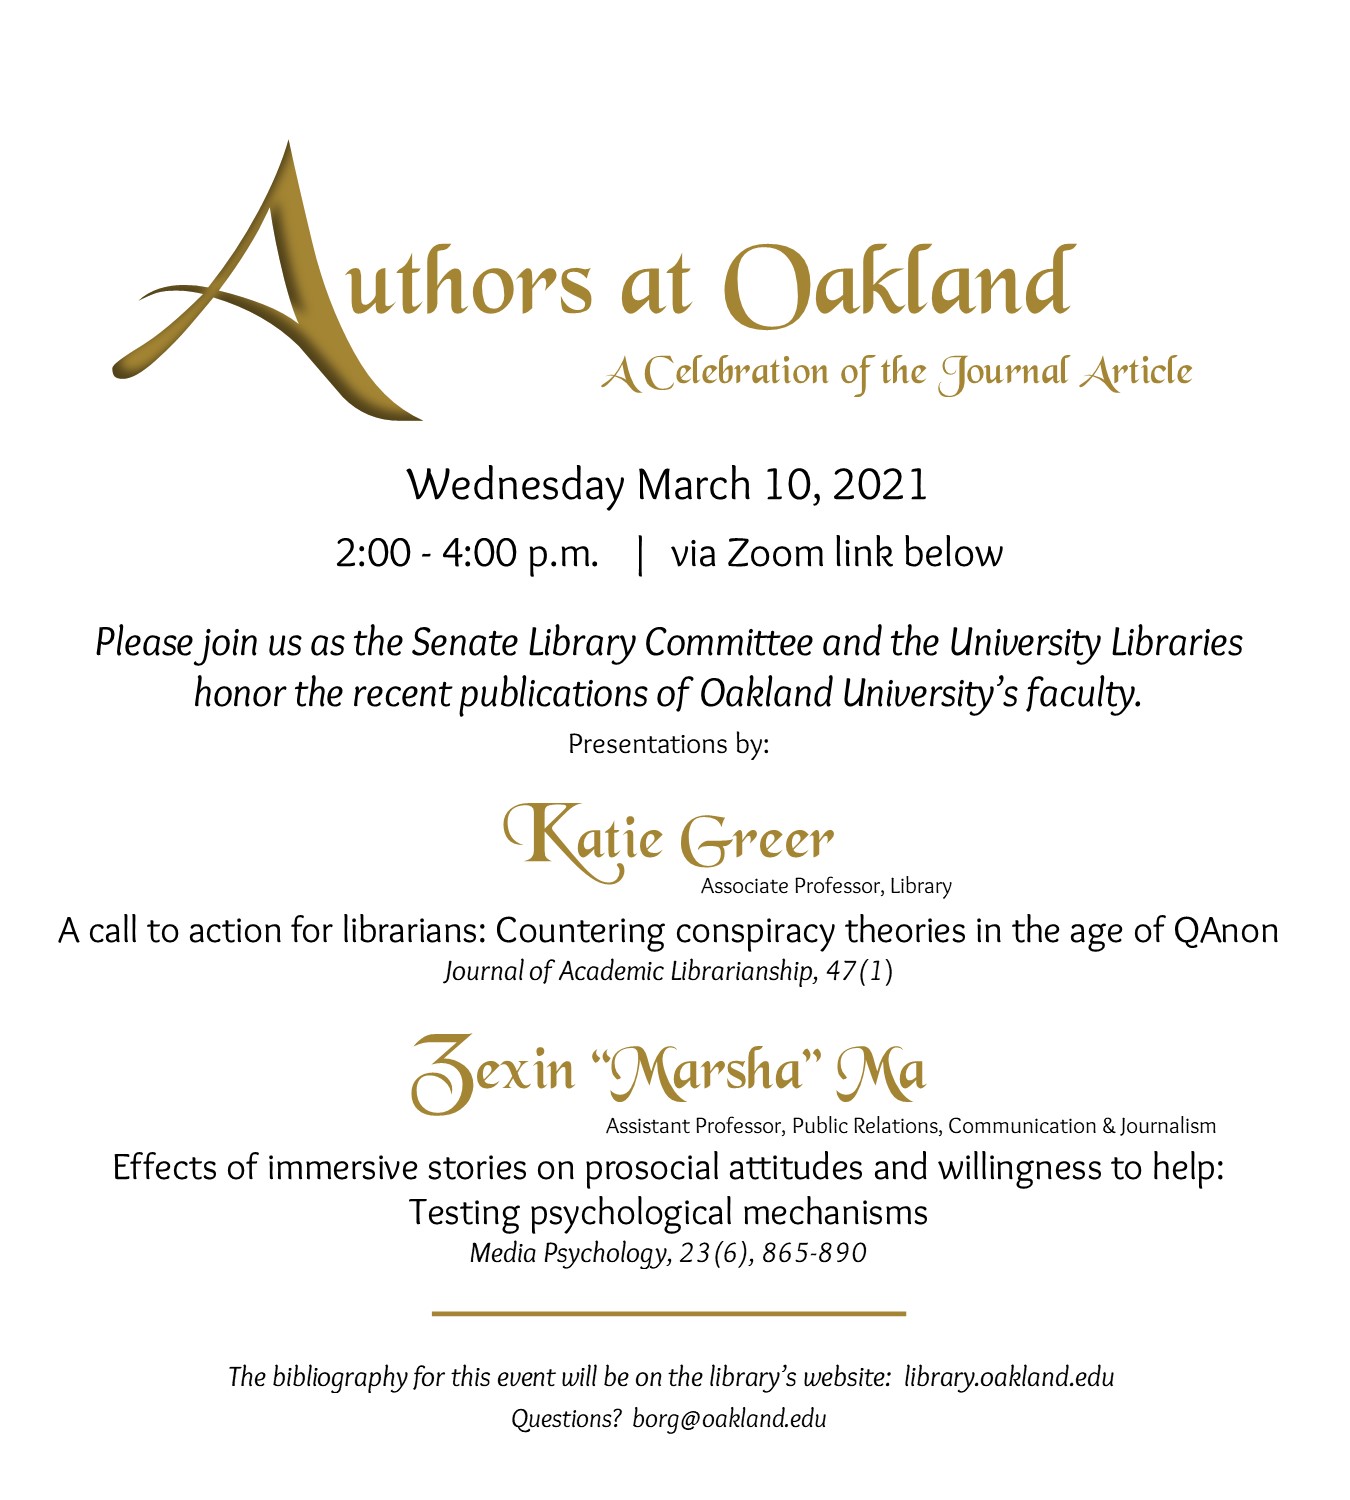 Invitation to Authors at Oakland 2021.